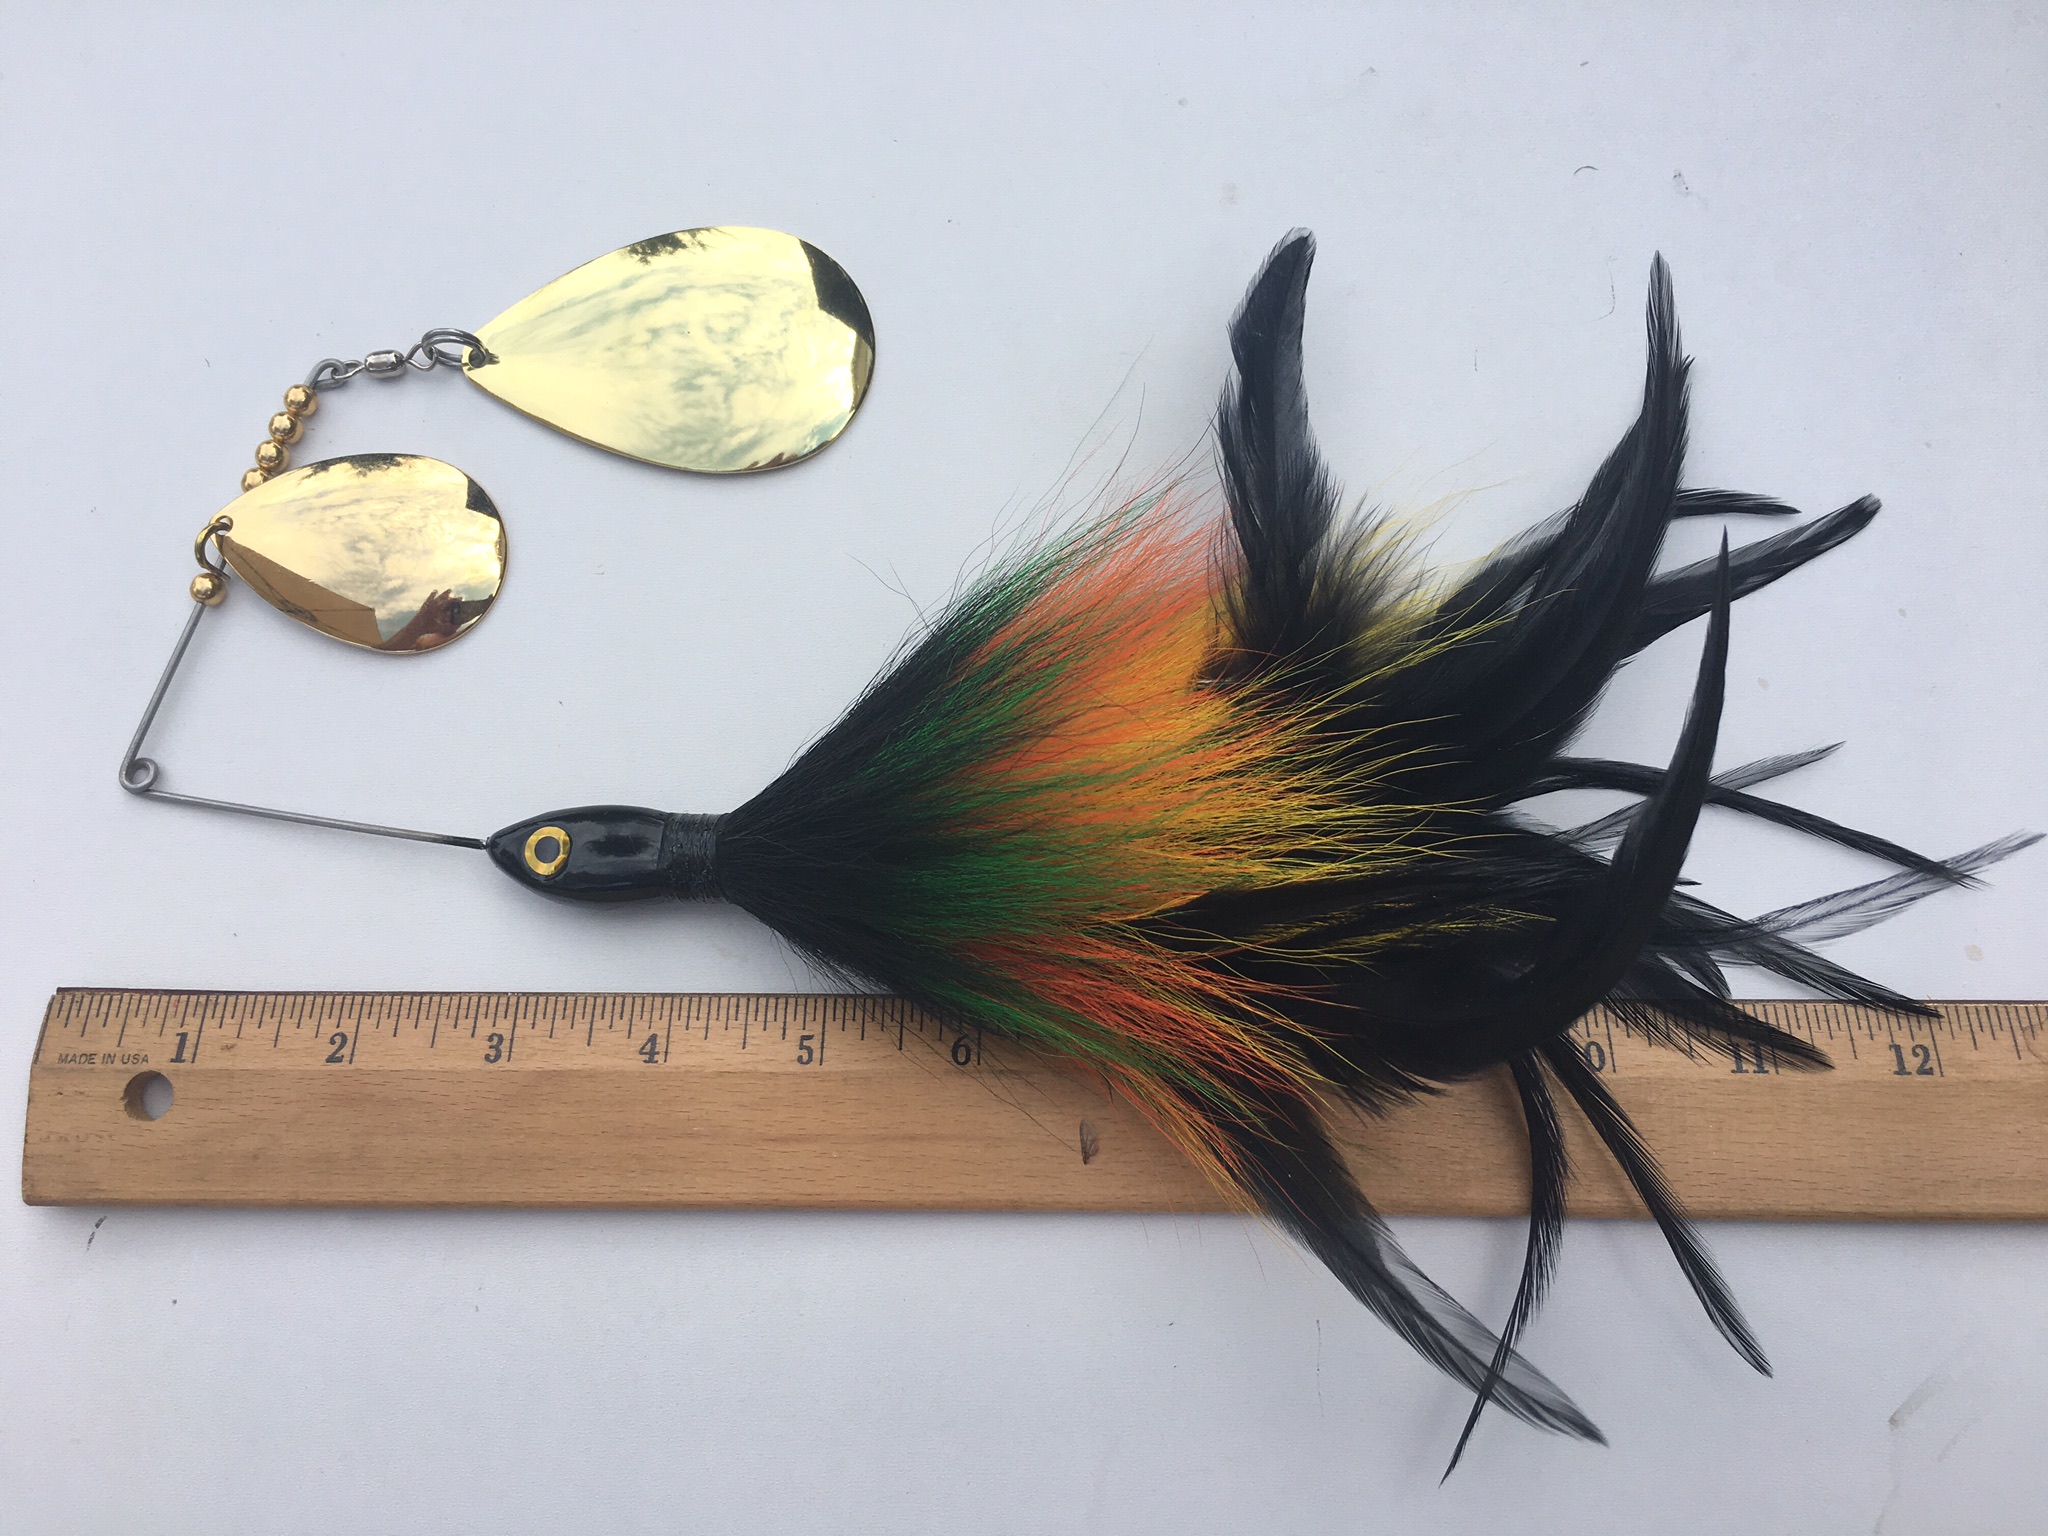 Our Perch patterned 2.85oz “Rambler” spinner bait